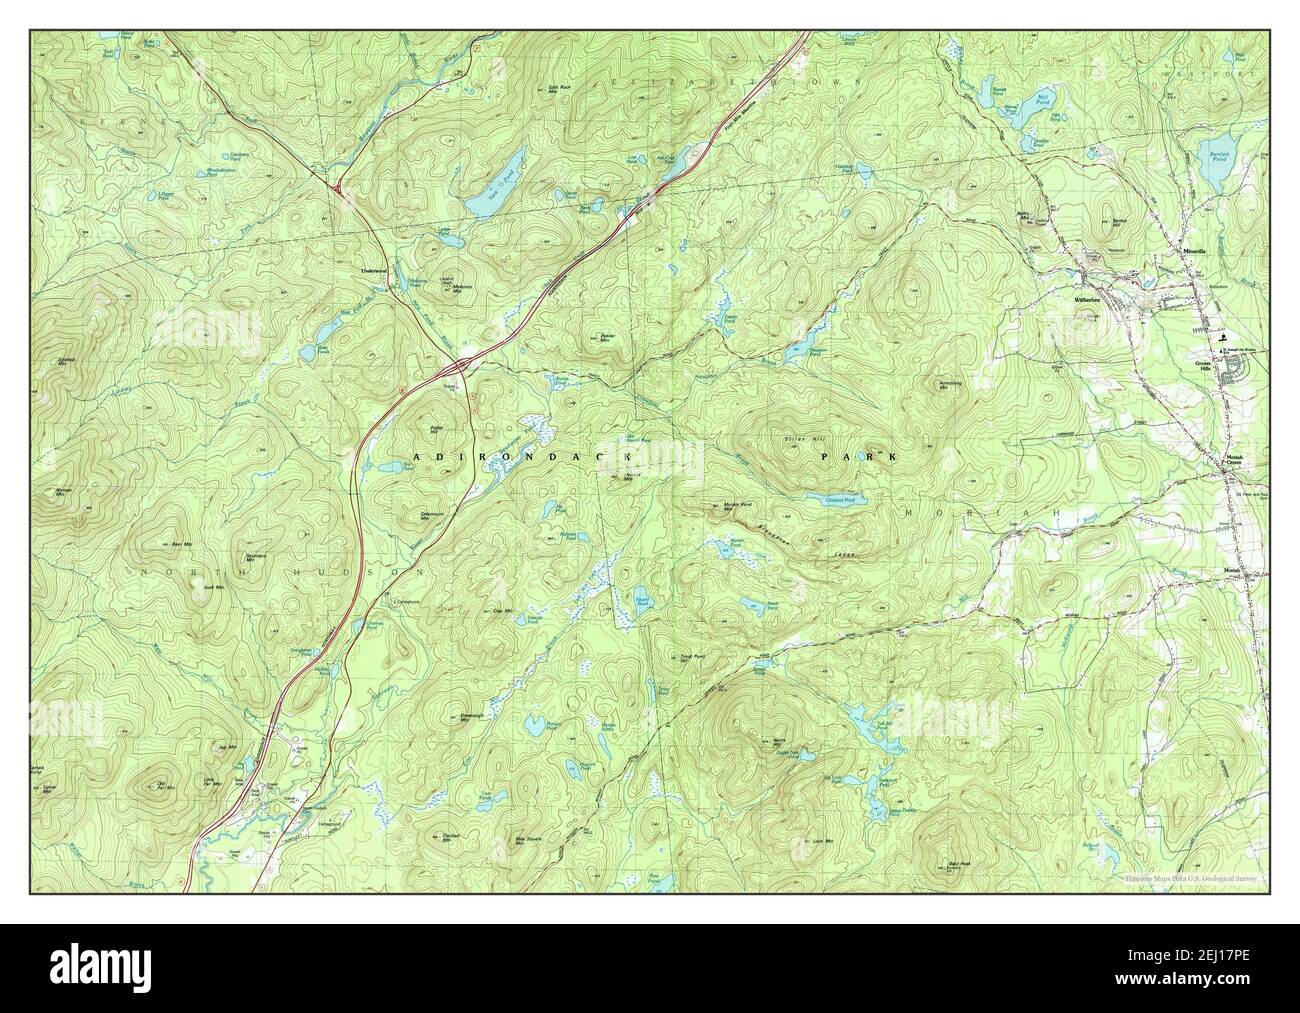 Witherbee, New York, map 1978, 1:25000, United States of America by Timeless Maps, data U.S. Geological Survey Stock Photo